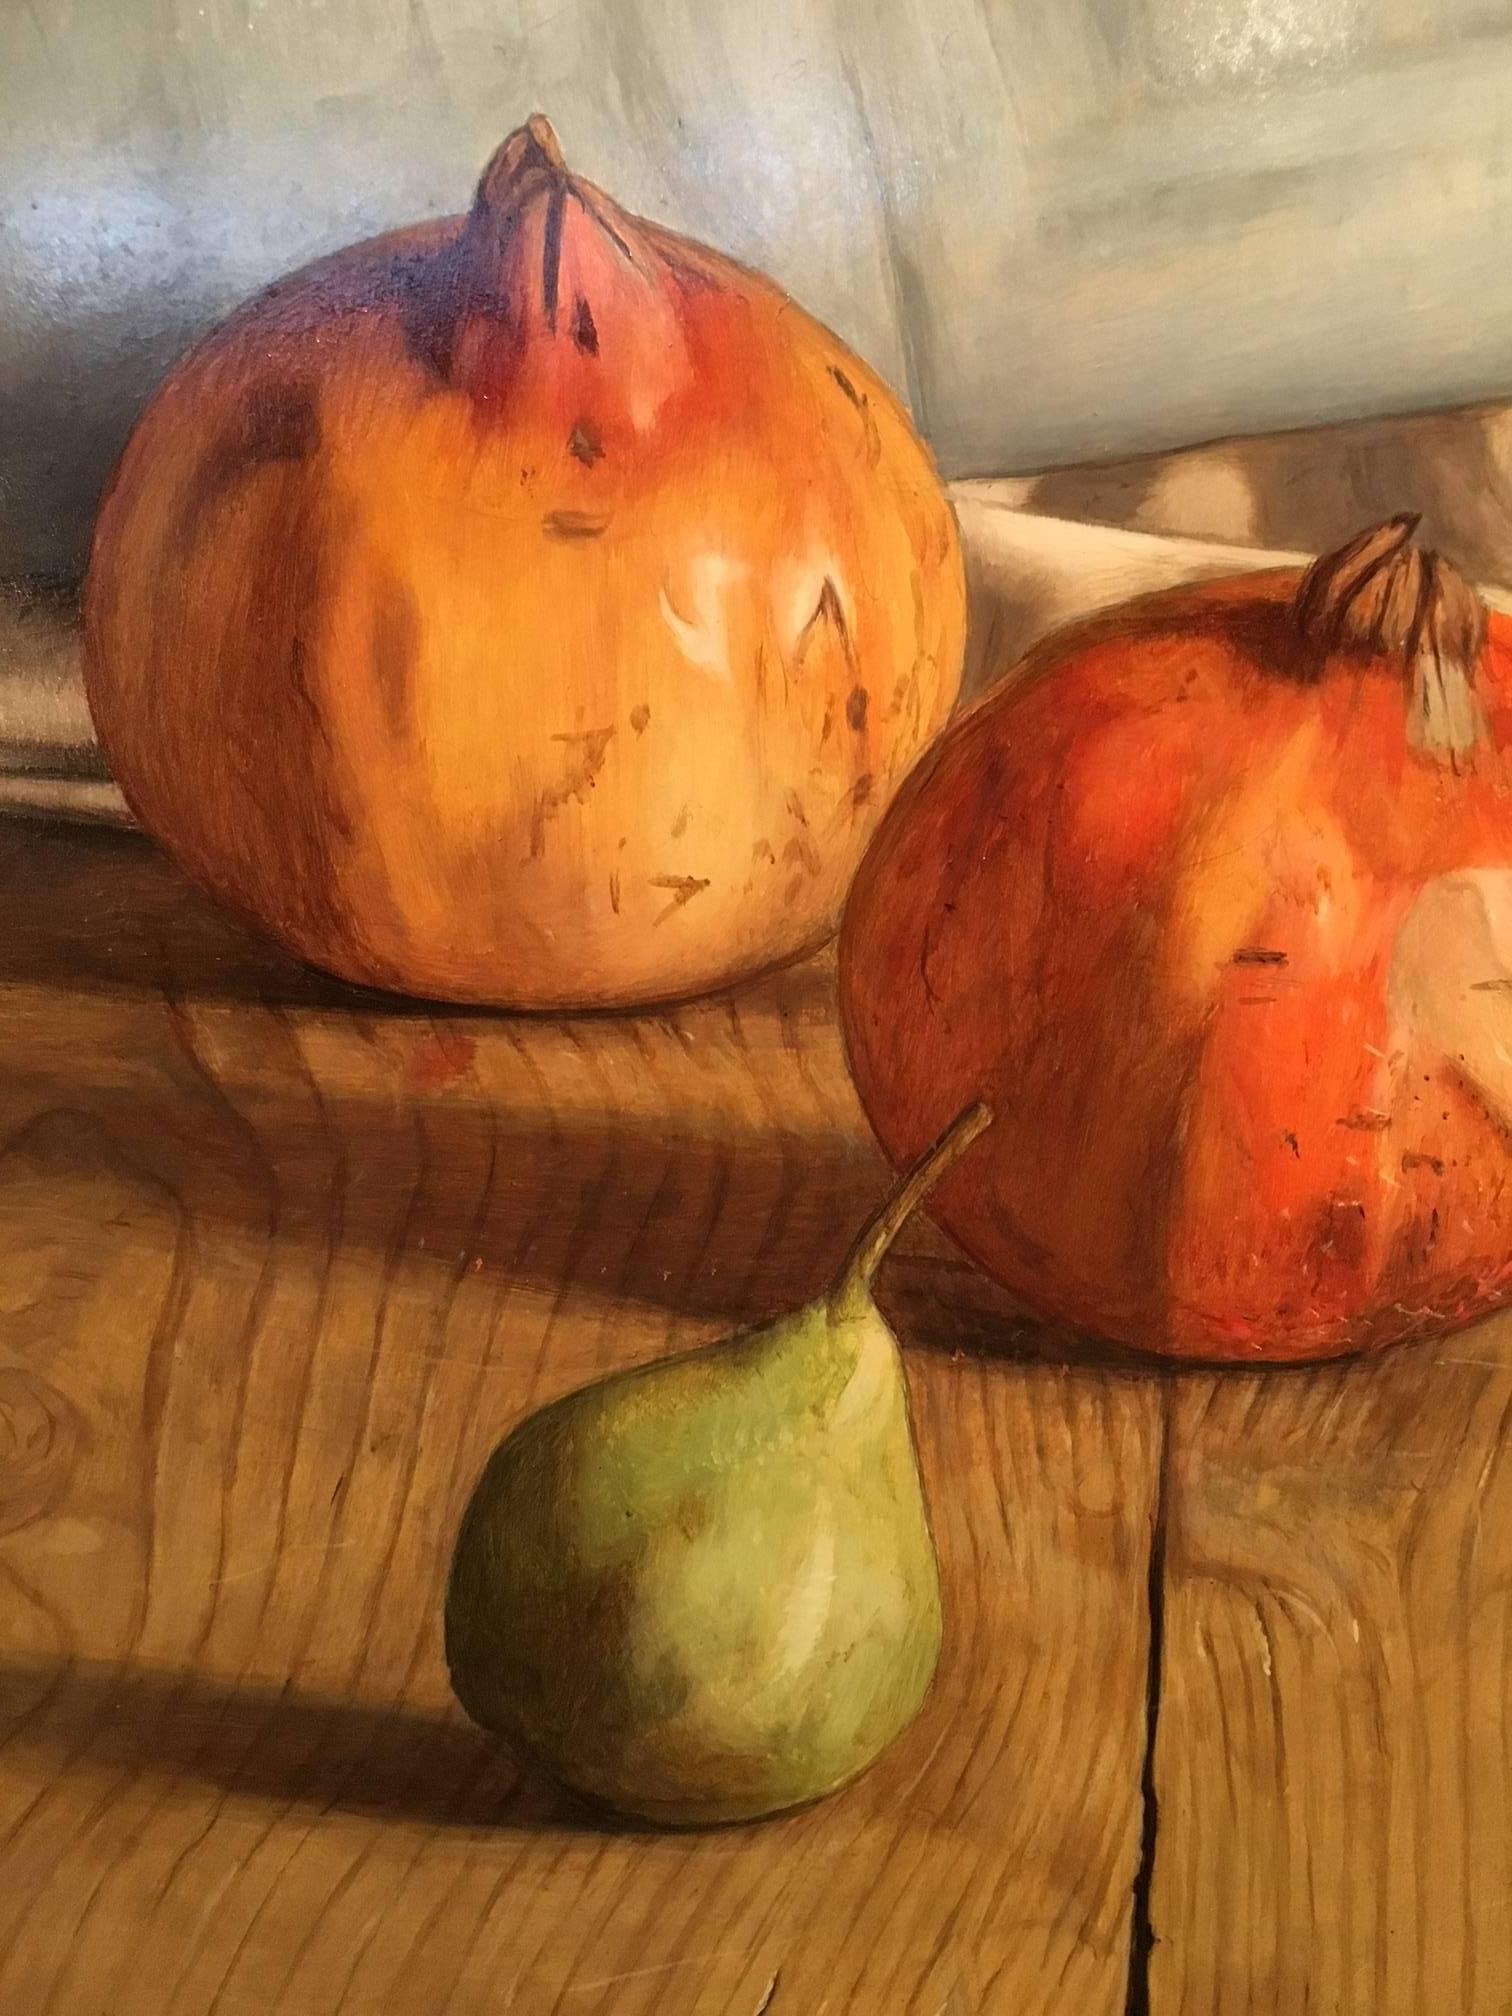 Pears and Pomegranates - Painting by Mark Lijftogt